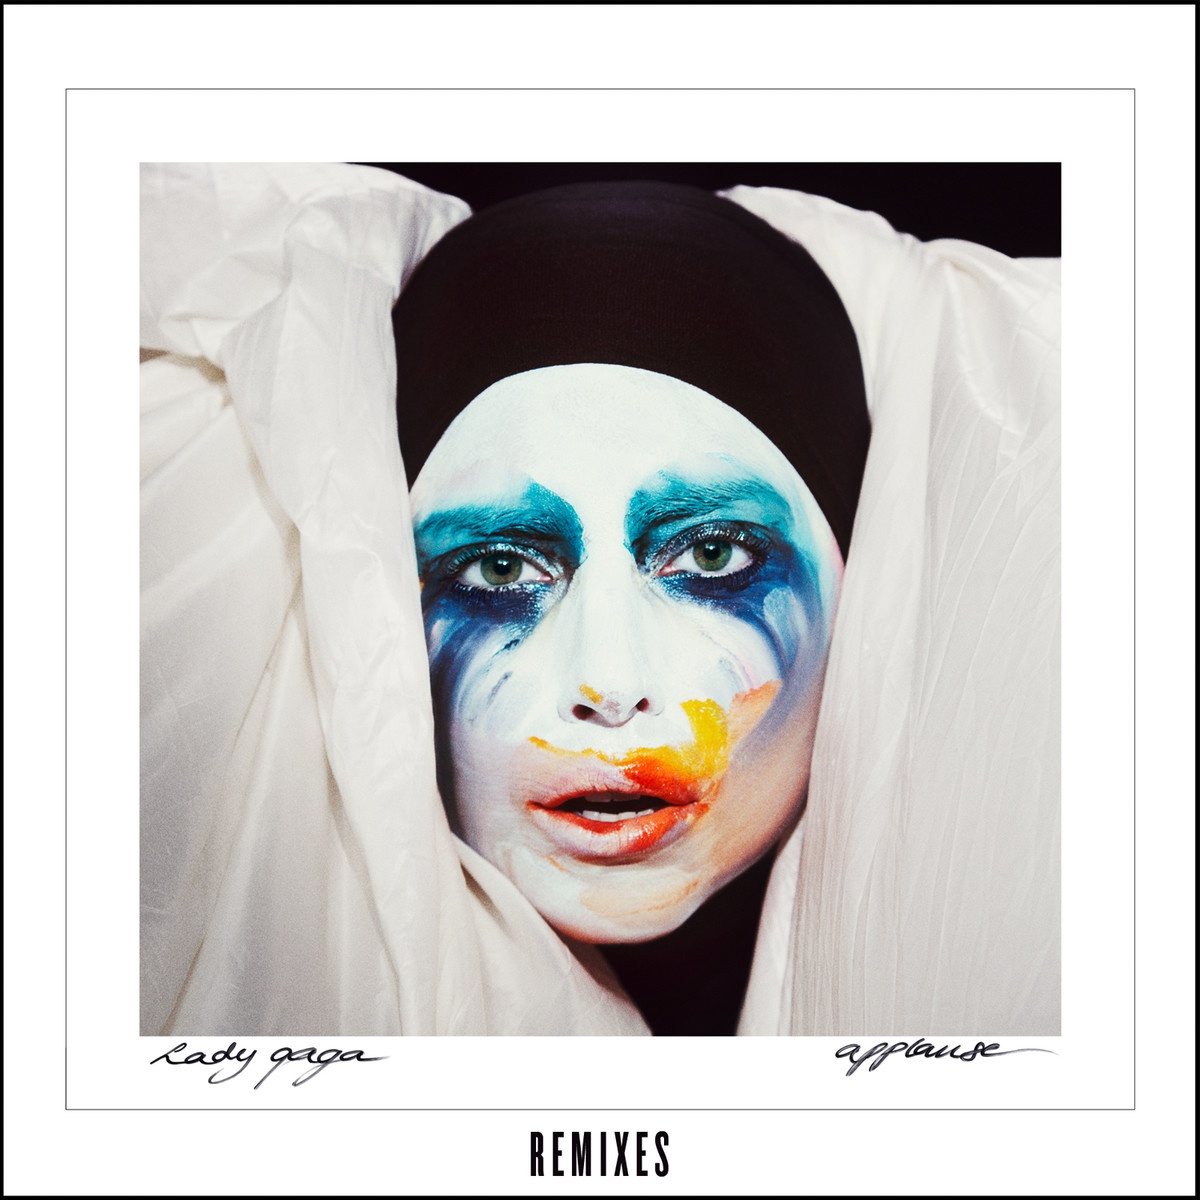 Applause (Viceroy Remix)